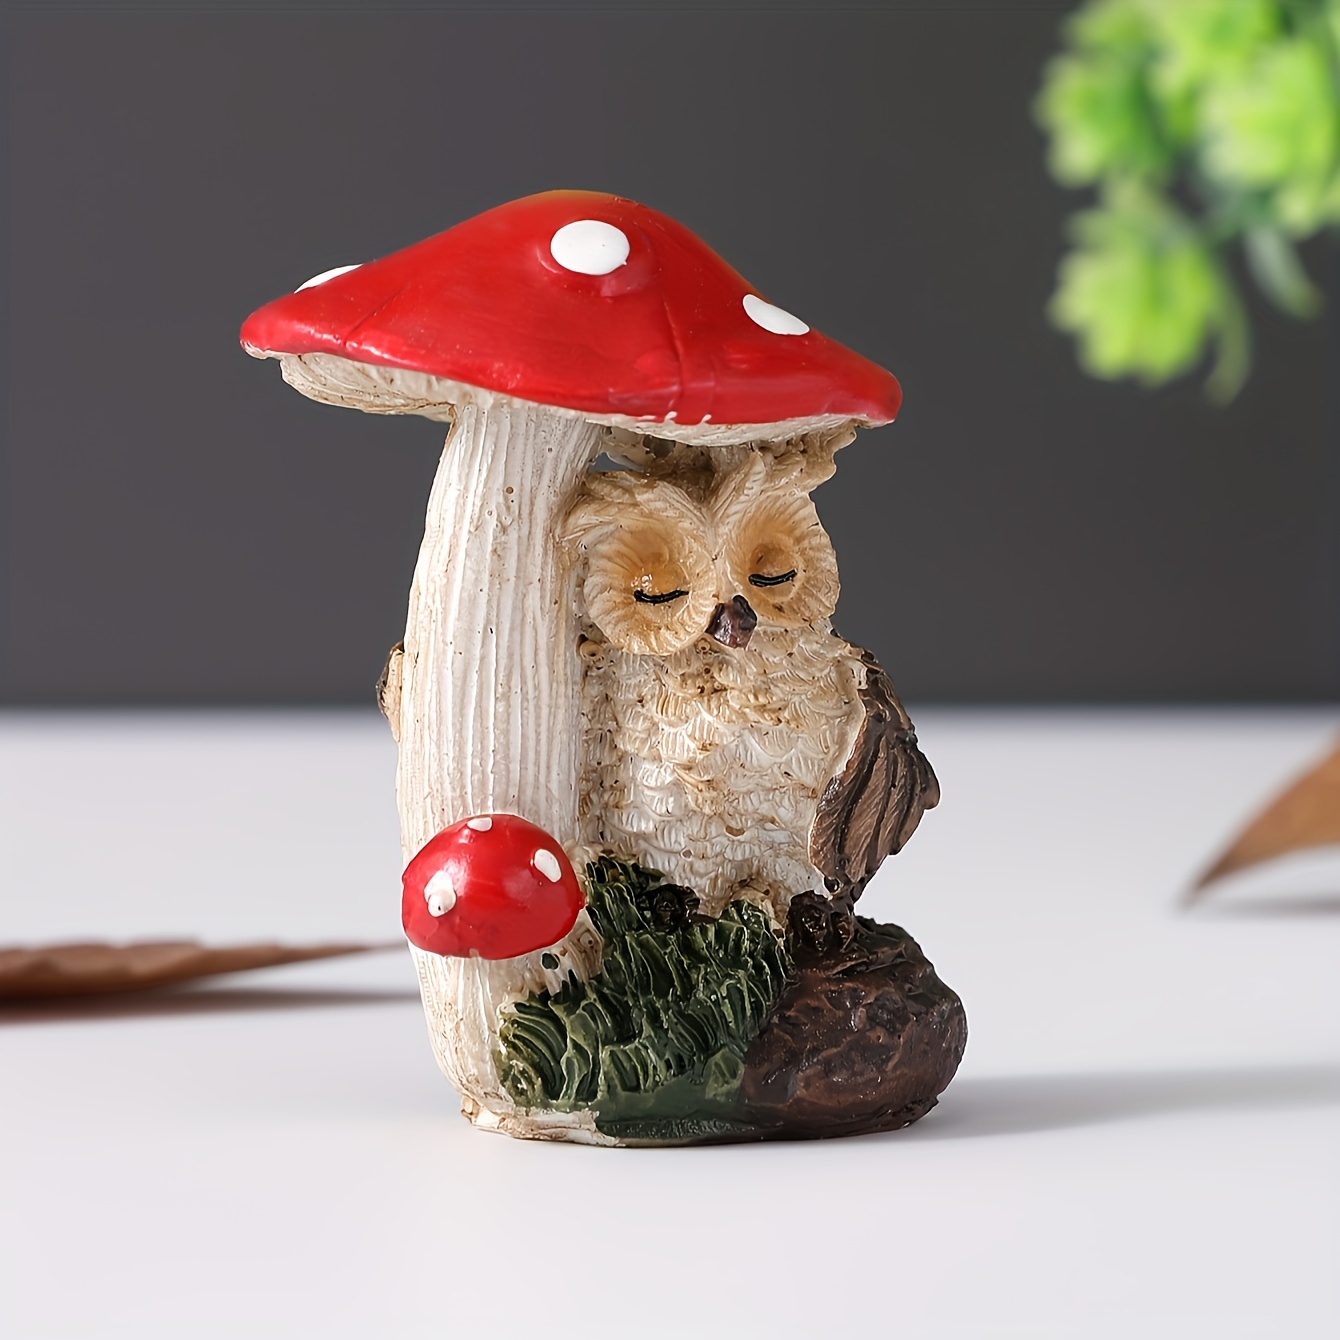 

1pc Rustic Owl Mushroom Figurine, Resin Crafted Cute Decorative Ornament, Artistic Decor For Home, Living Room, Bar, Cafe, Tabletop Display Decor